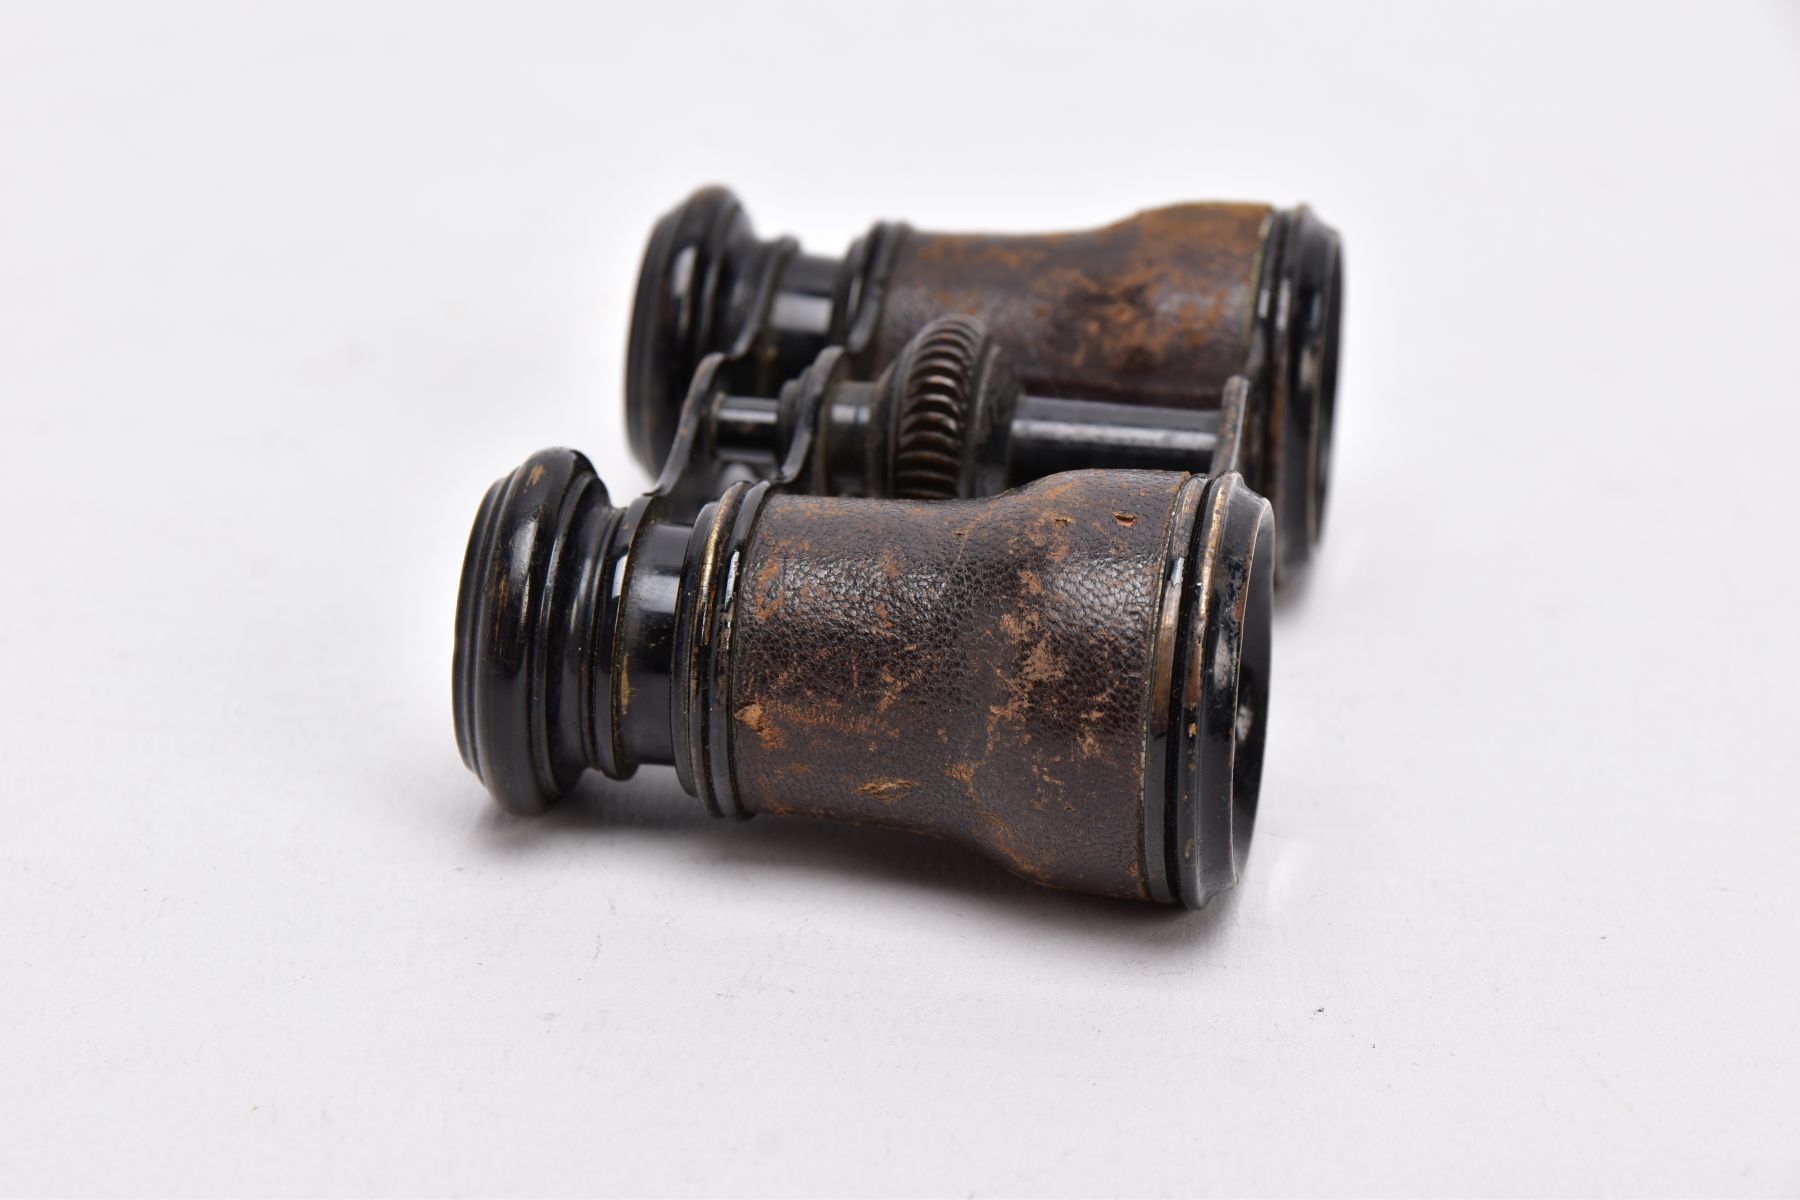 A PAIR OF EARLY 20TH CENTURY OPERA GLASSES, leather cased objective barrels, central focus wheel - Image 6 of 6